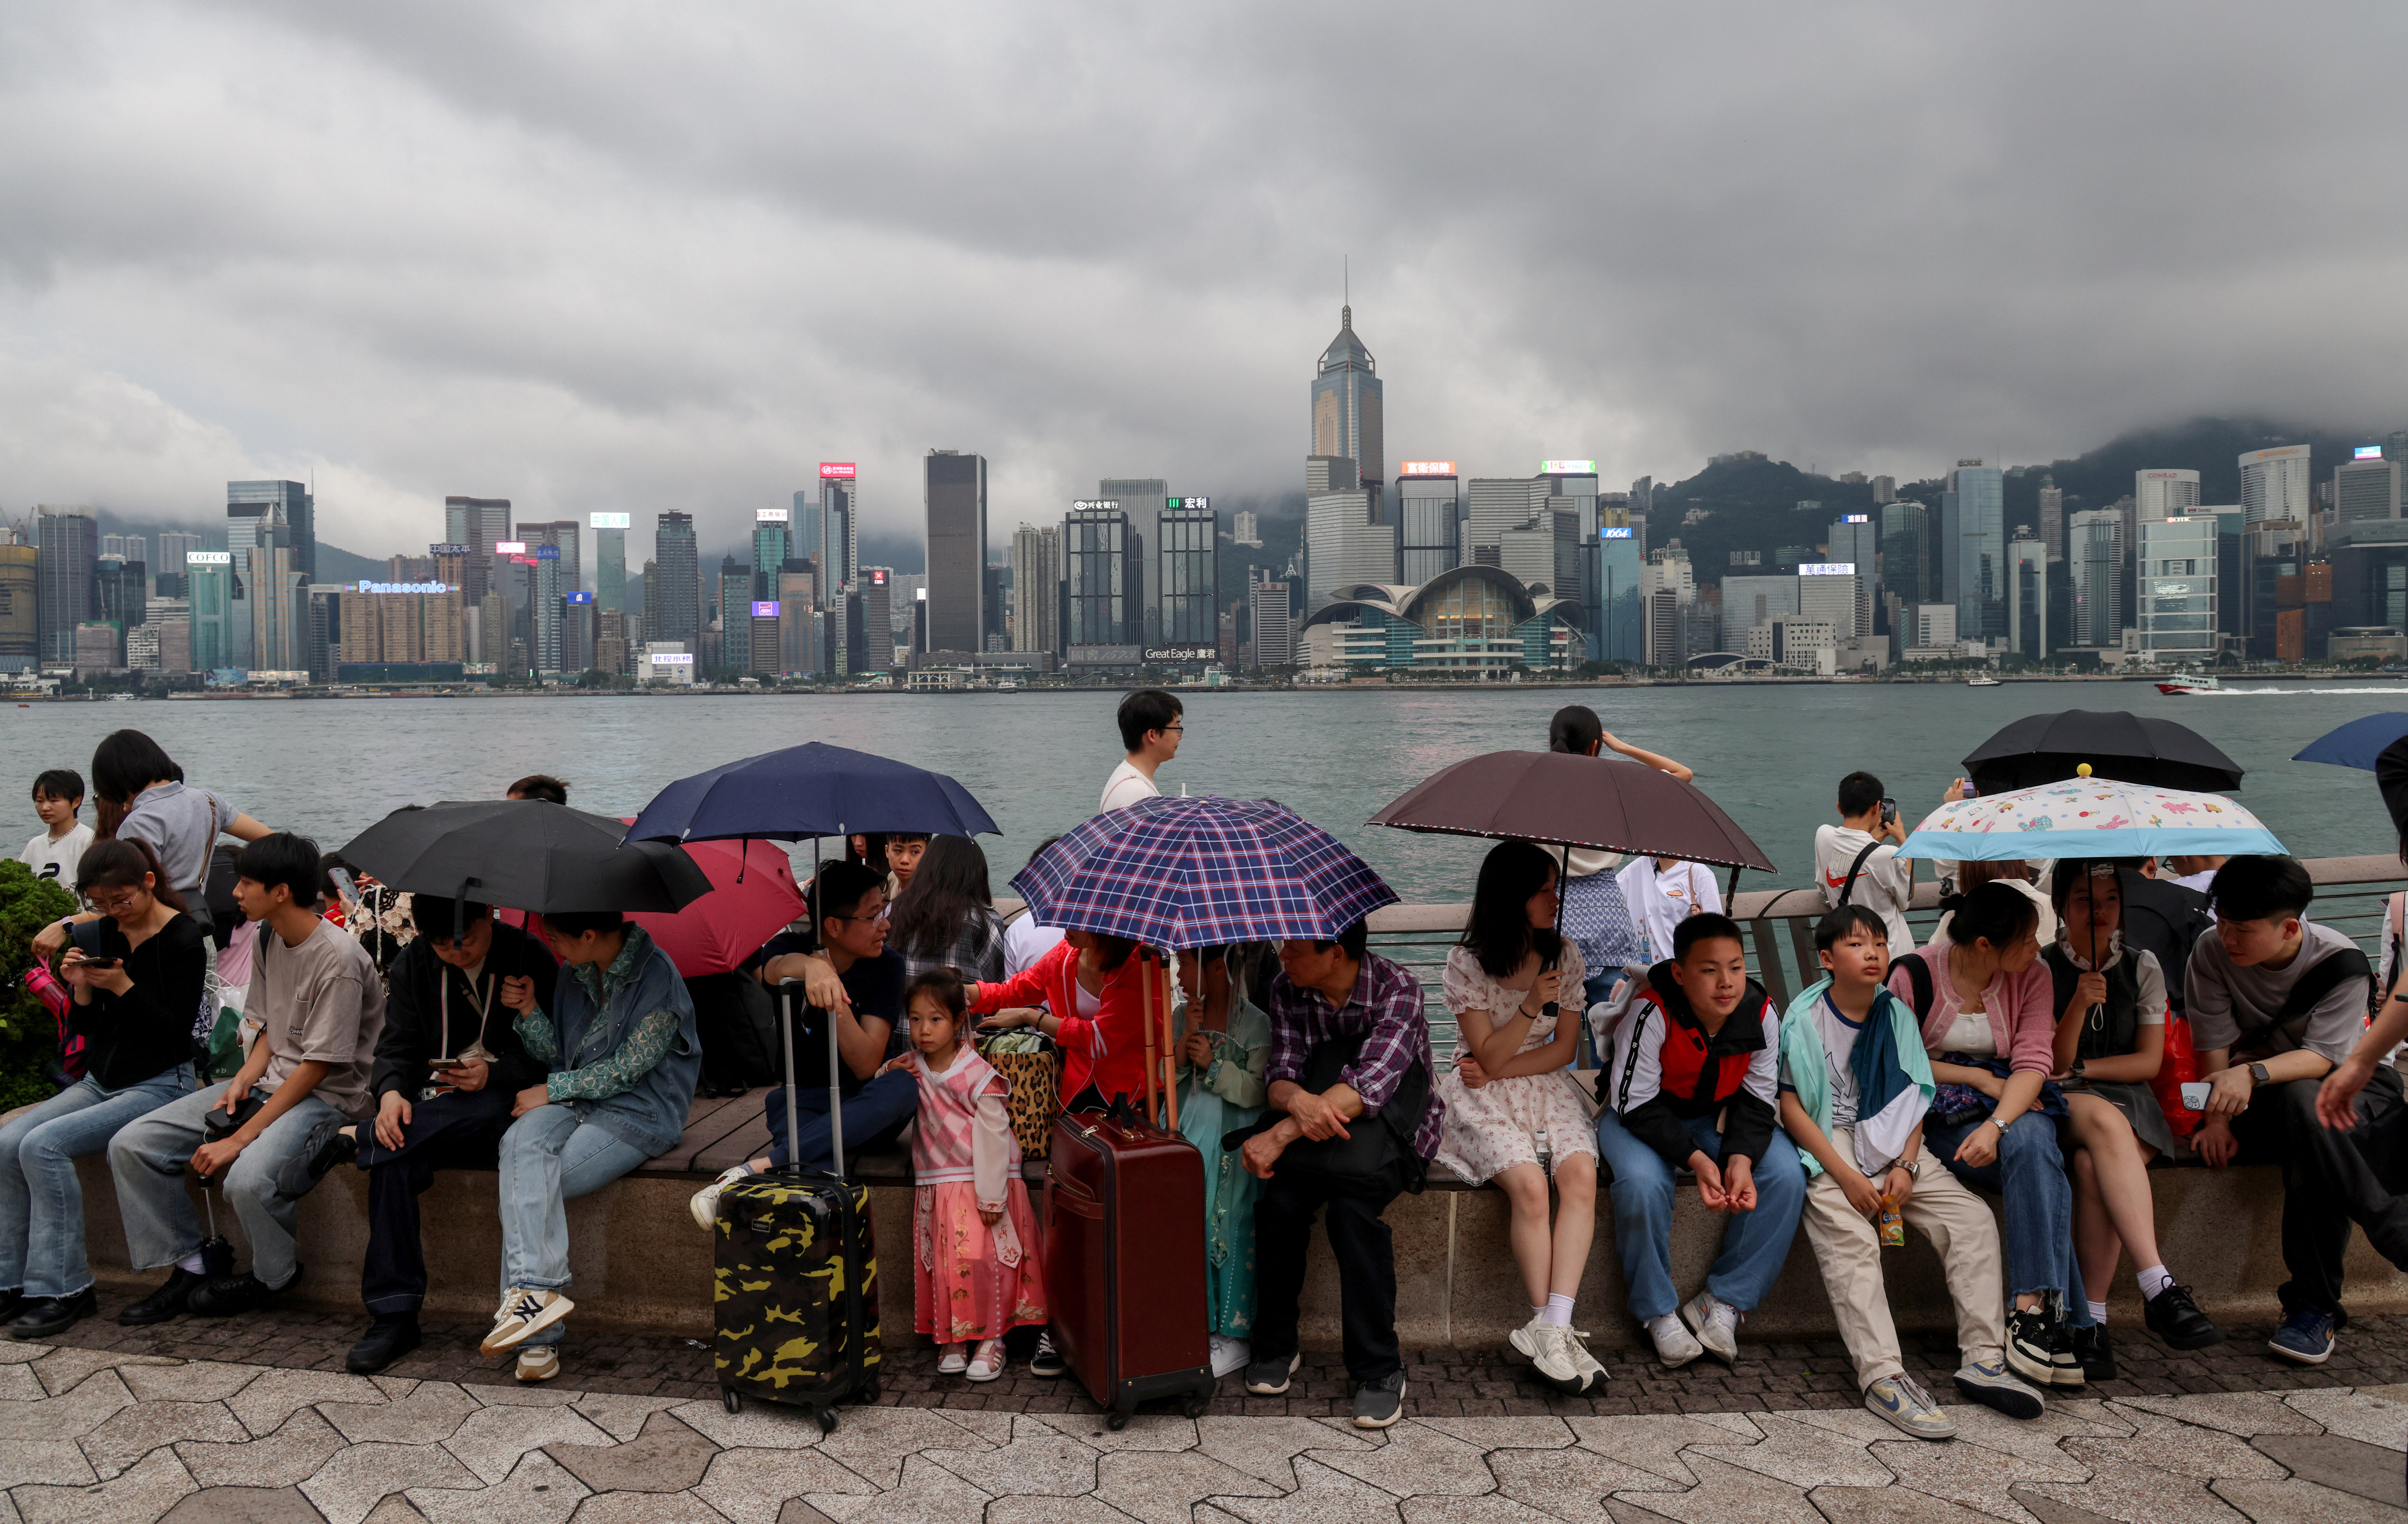 Hong Kong records 20% fewer trips than expected on day one of Labour Day ‘golden week’ holiday amid bad weather. Photo: Jelly Tse